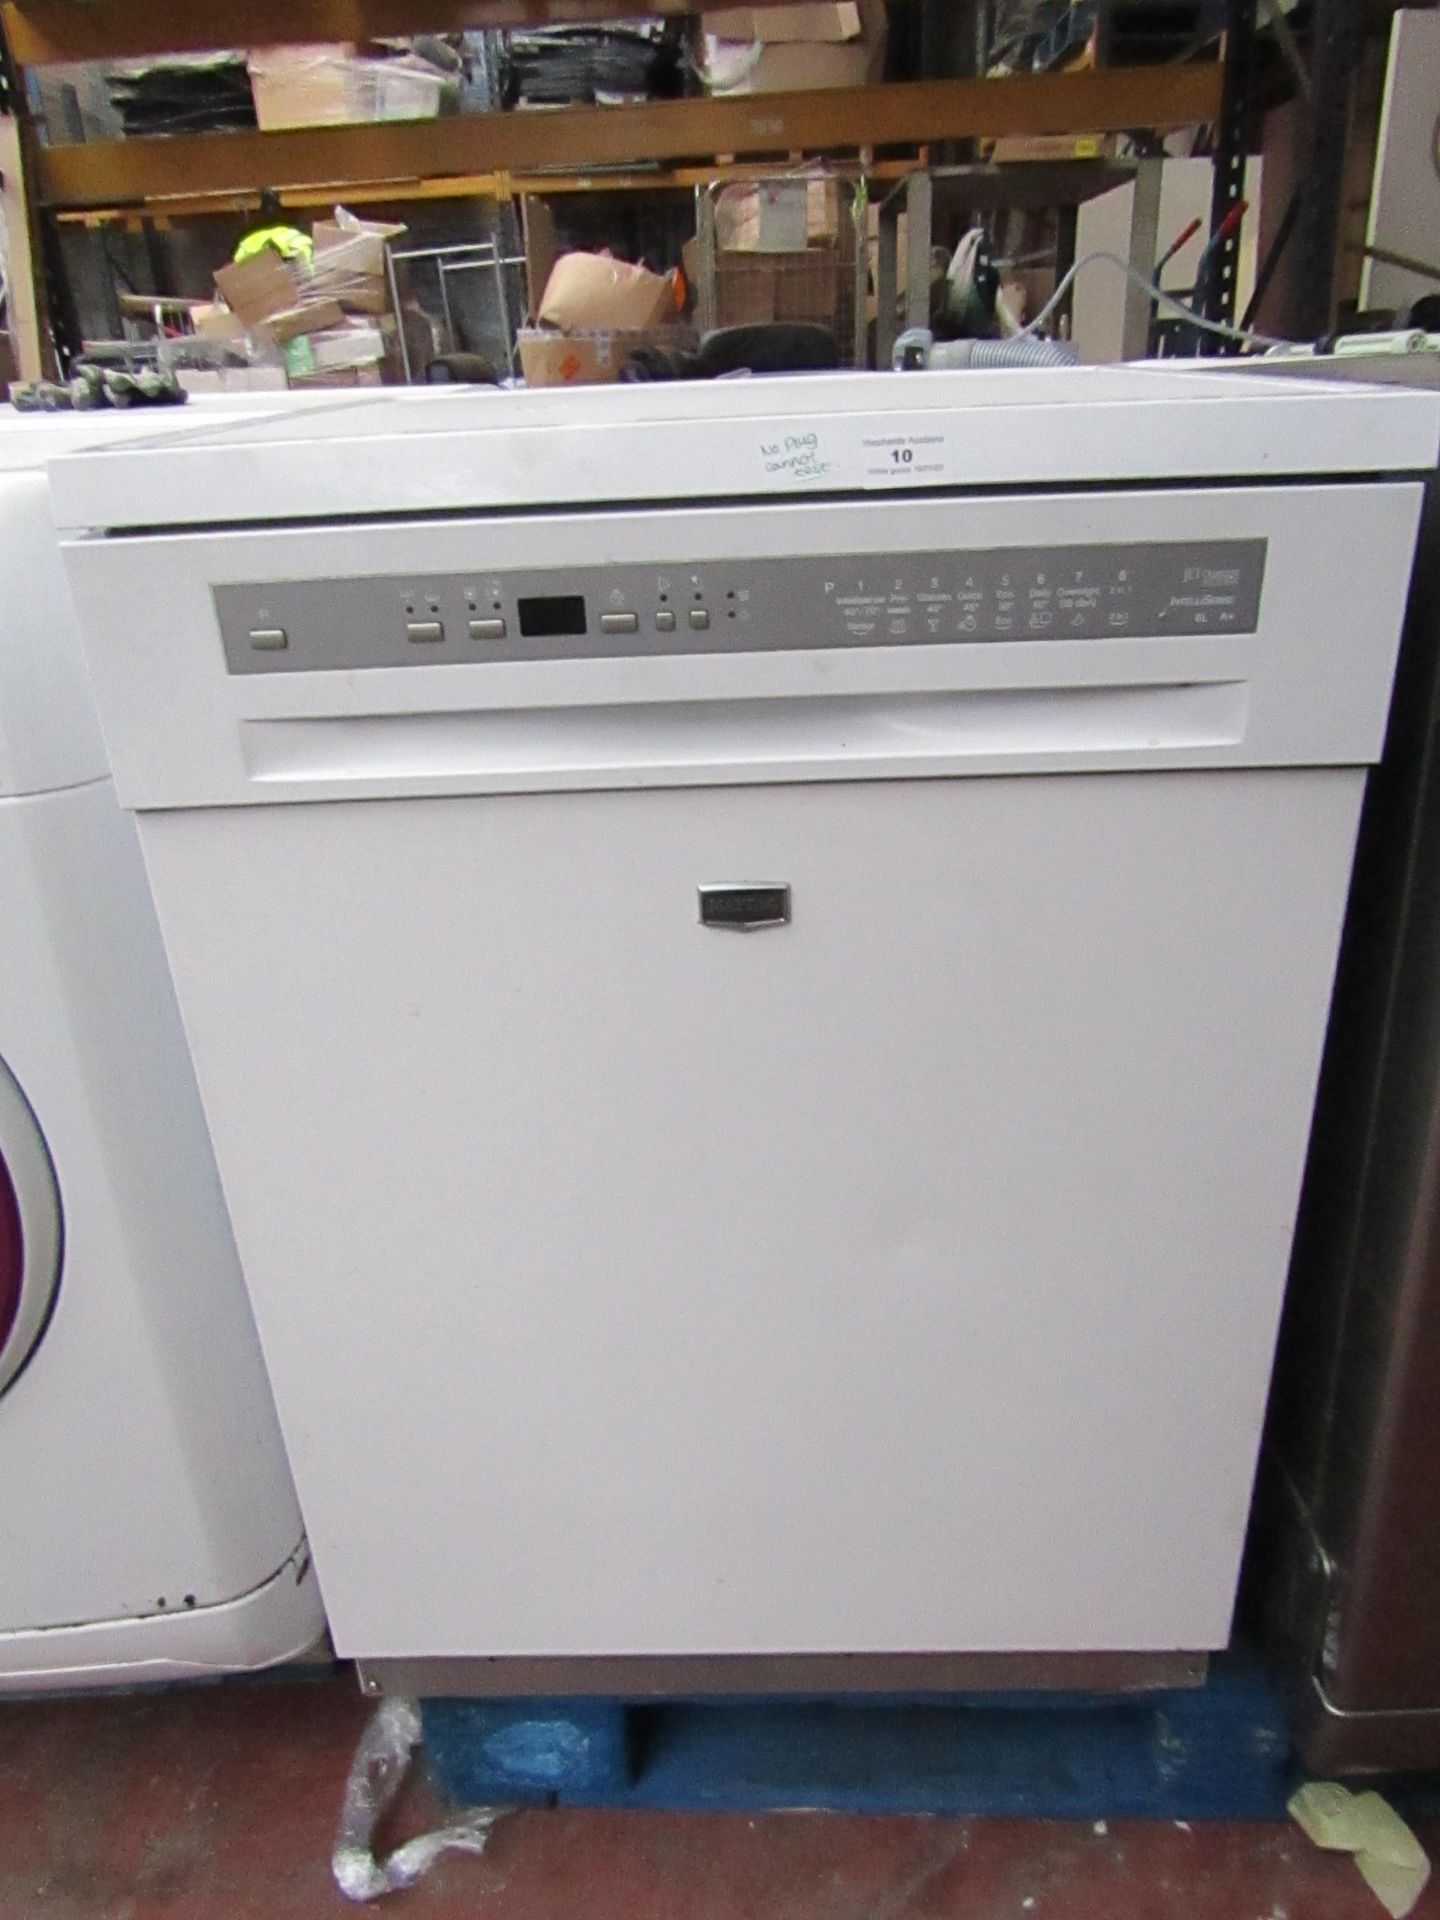 Maytag - Dishwasher in White | MDW0713AGW, Jet Clean, 6 Litre Water Consumption - No Plug, Cannot be